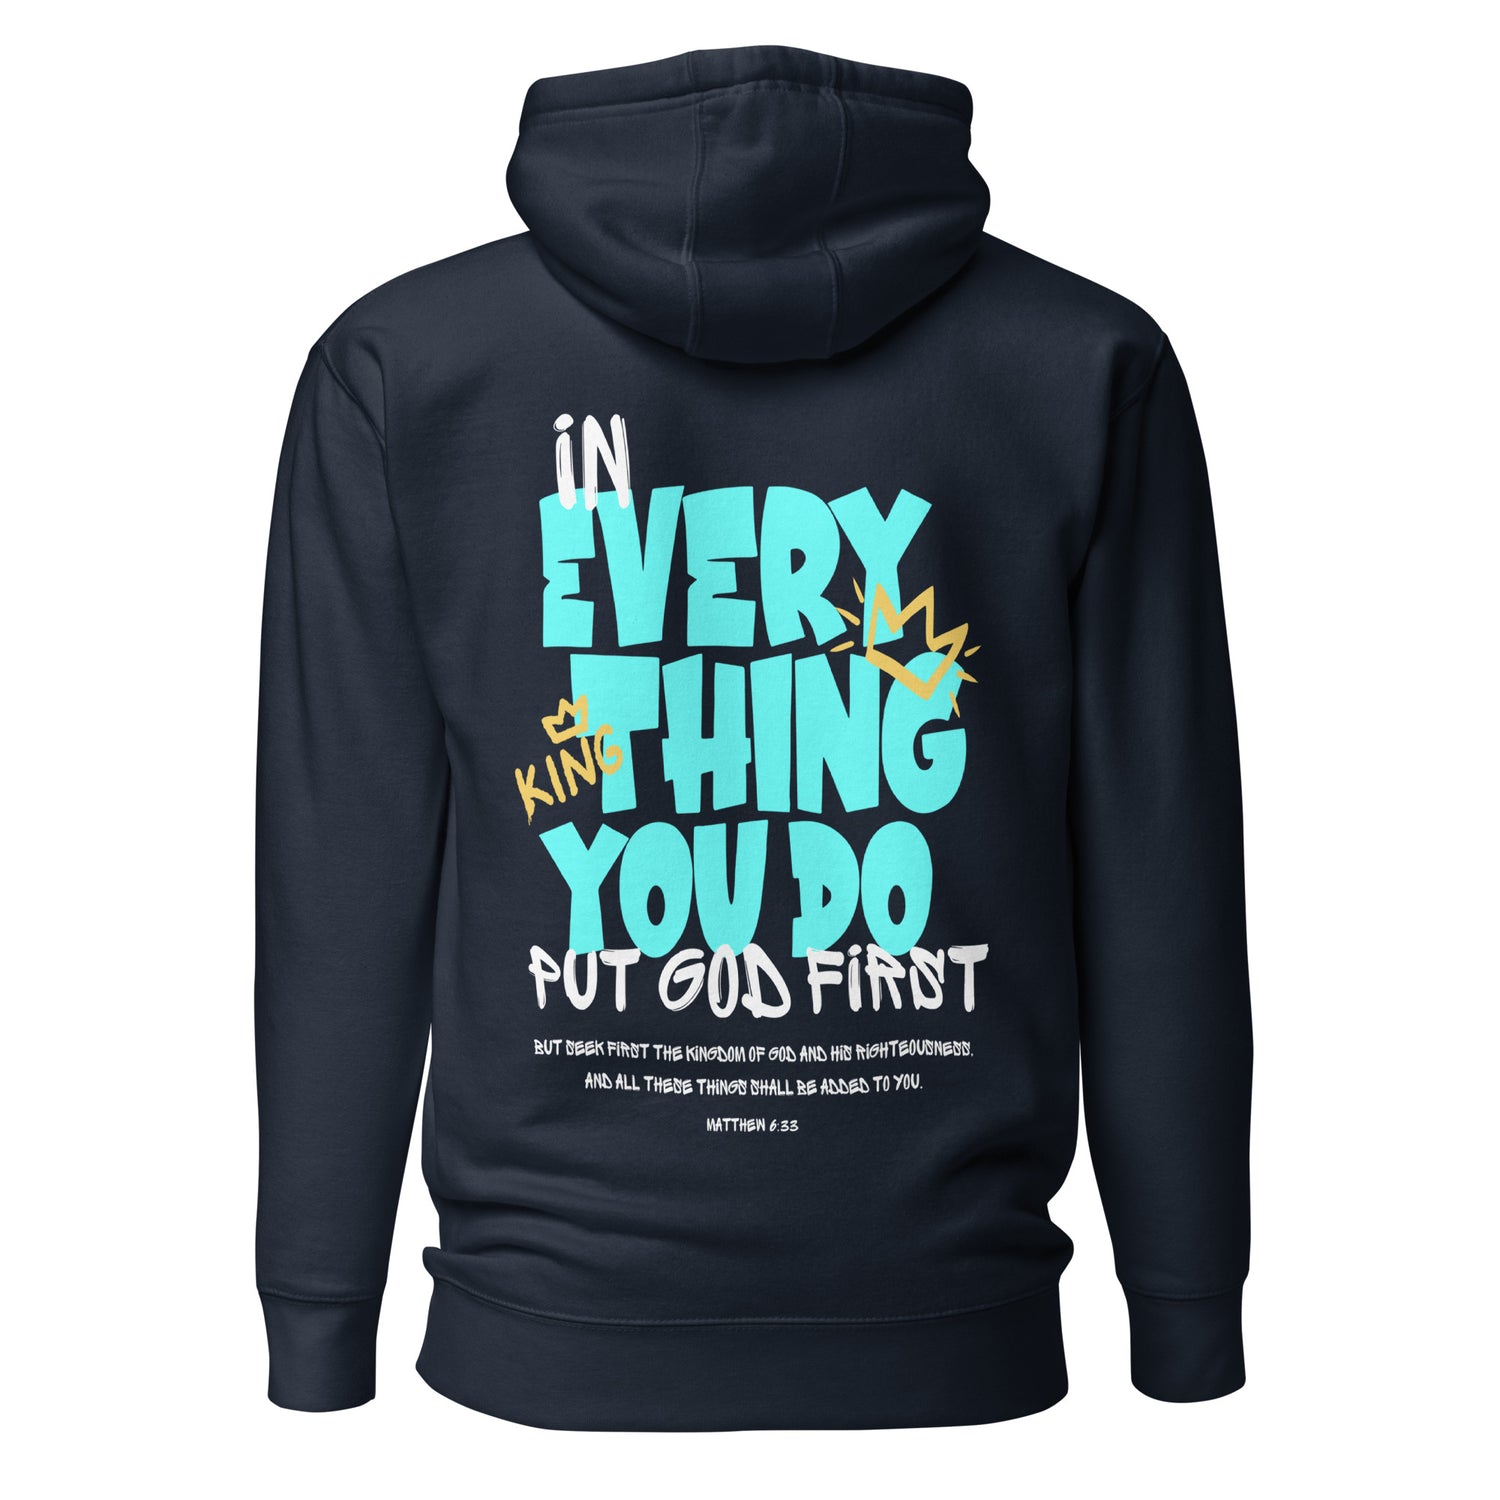 Put God First Navy Blue Hoodie | MAD Apparel